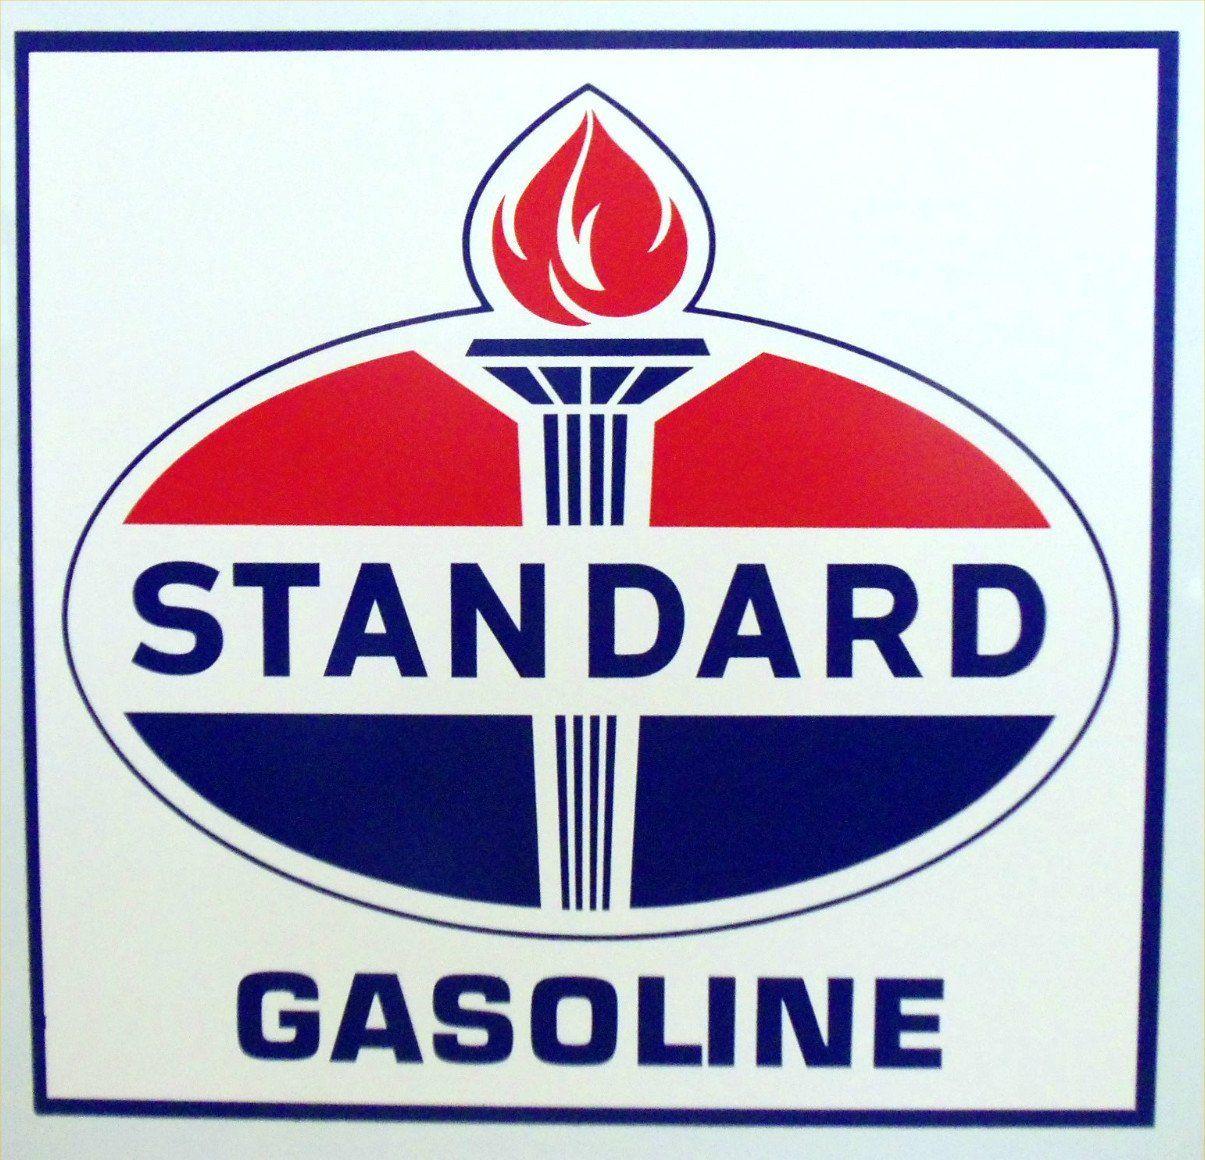 Standard Oil Company Logo - Standard Oil Company of New Jersey and New York were incorporated